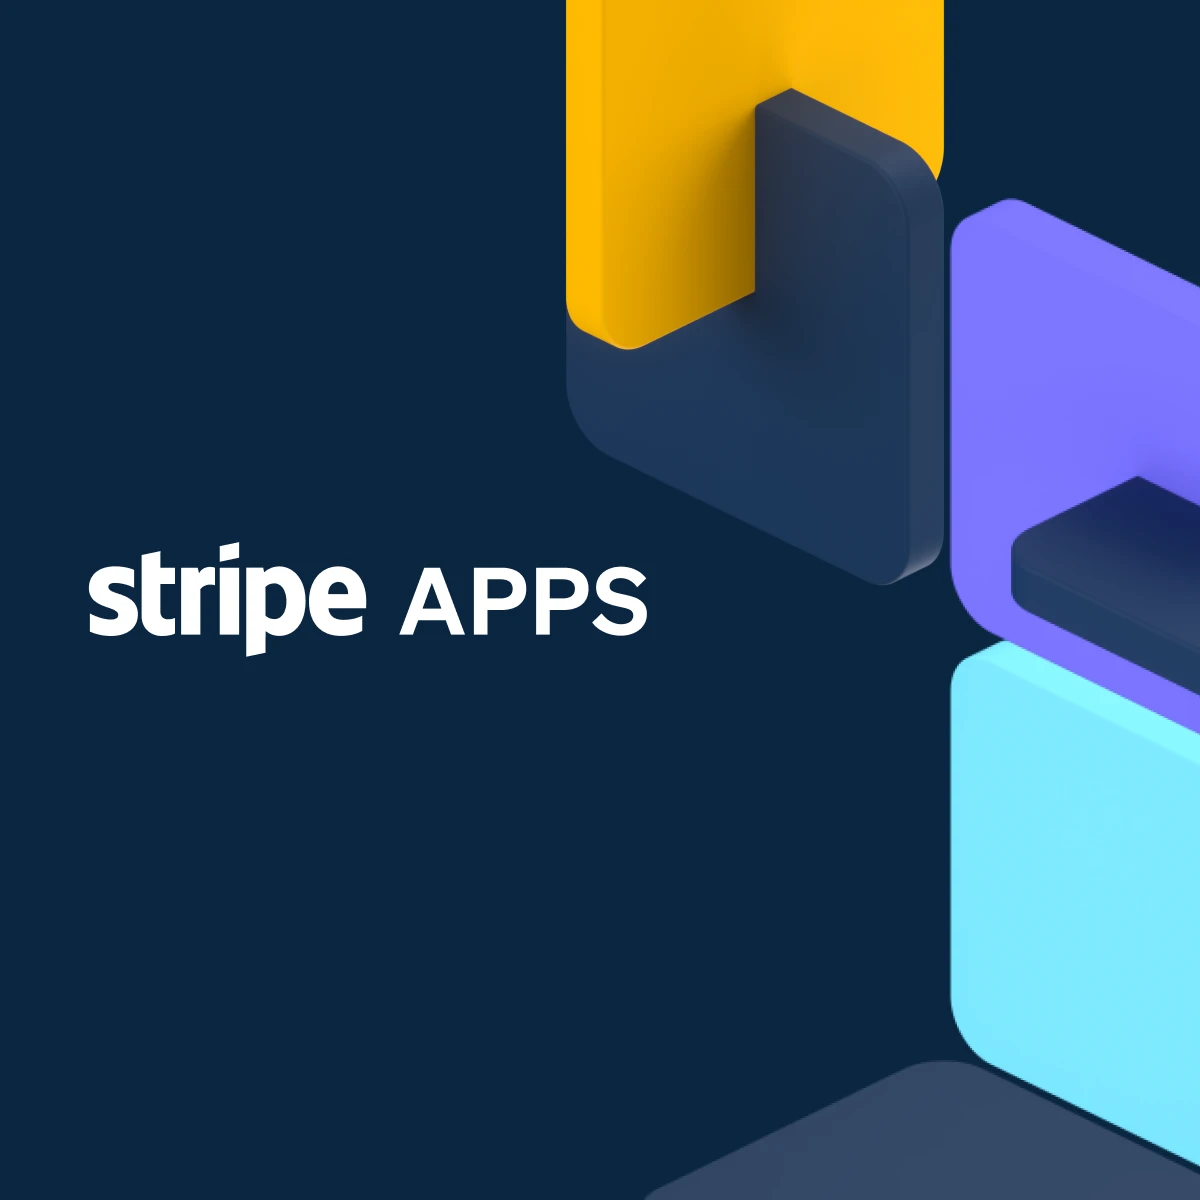 link card for the project Stripe Apps showing floating app tiles and the Stripe Apps logo